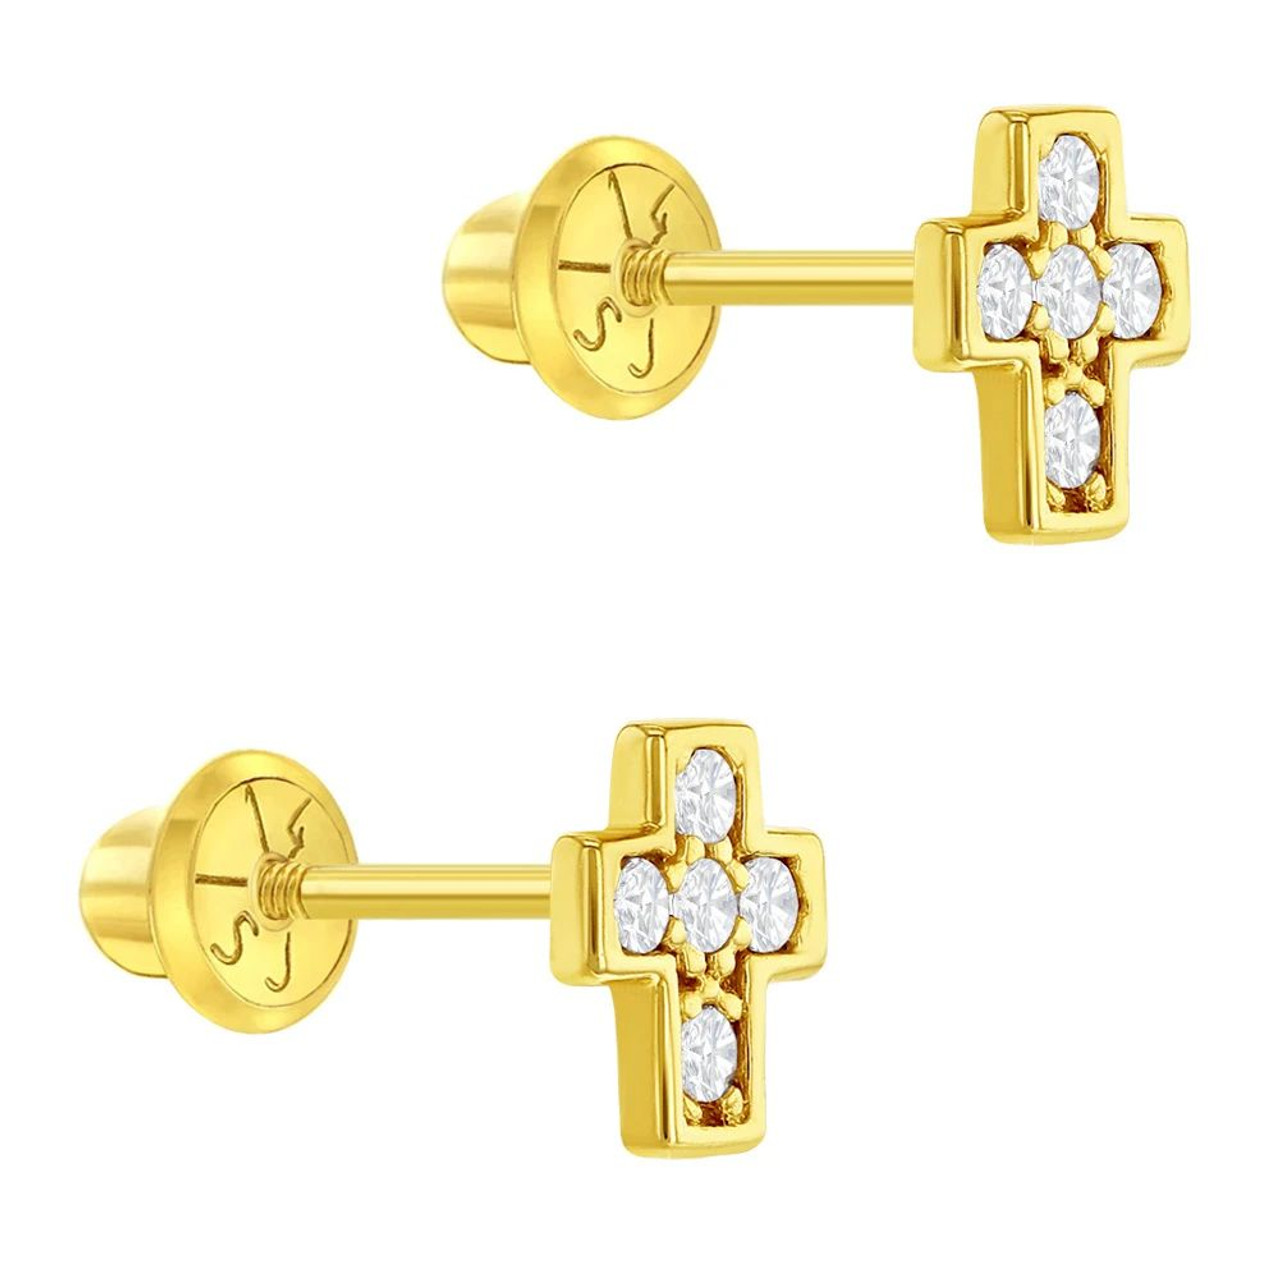 Flower Crystal Cross Baby Earrings in 14k Yellow Gold with Safety Backs